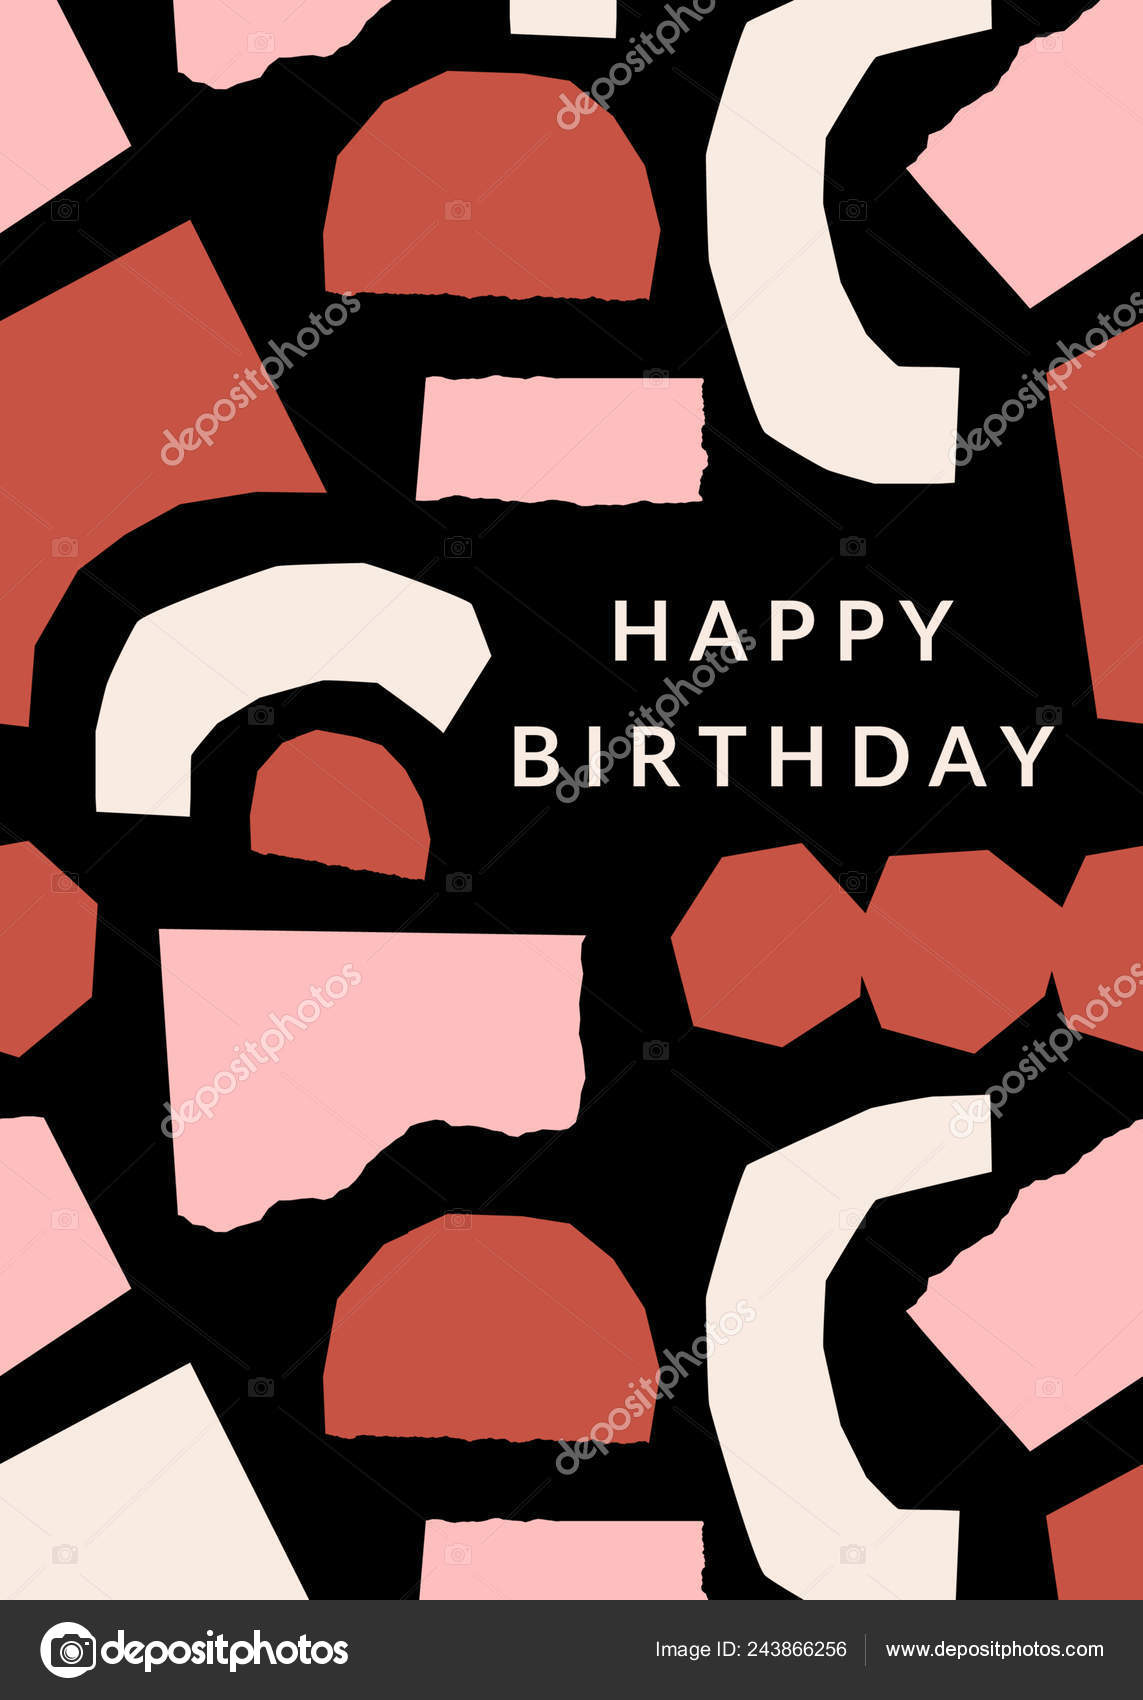 Greeting Card Template Paper Cut Shapes Cream Pastel Pink Brick Regarding Birthday Card Collage Template